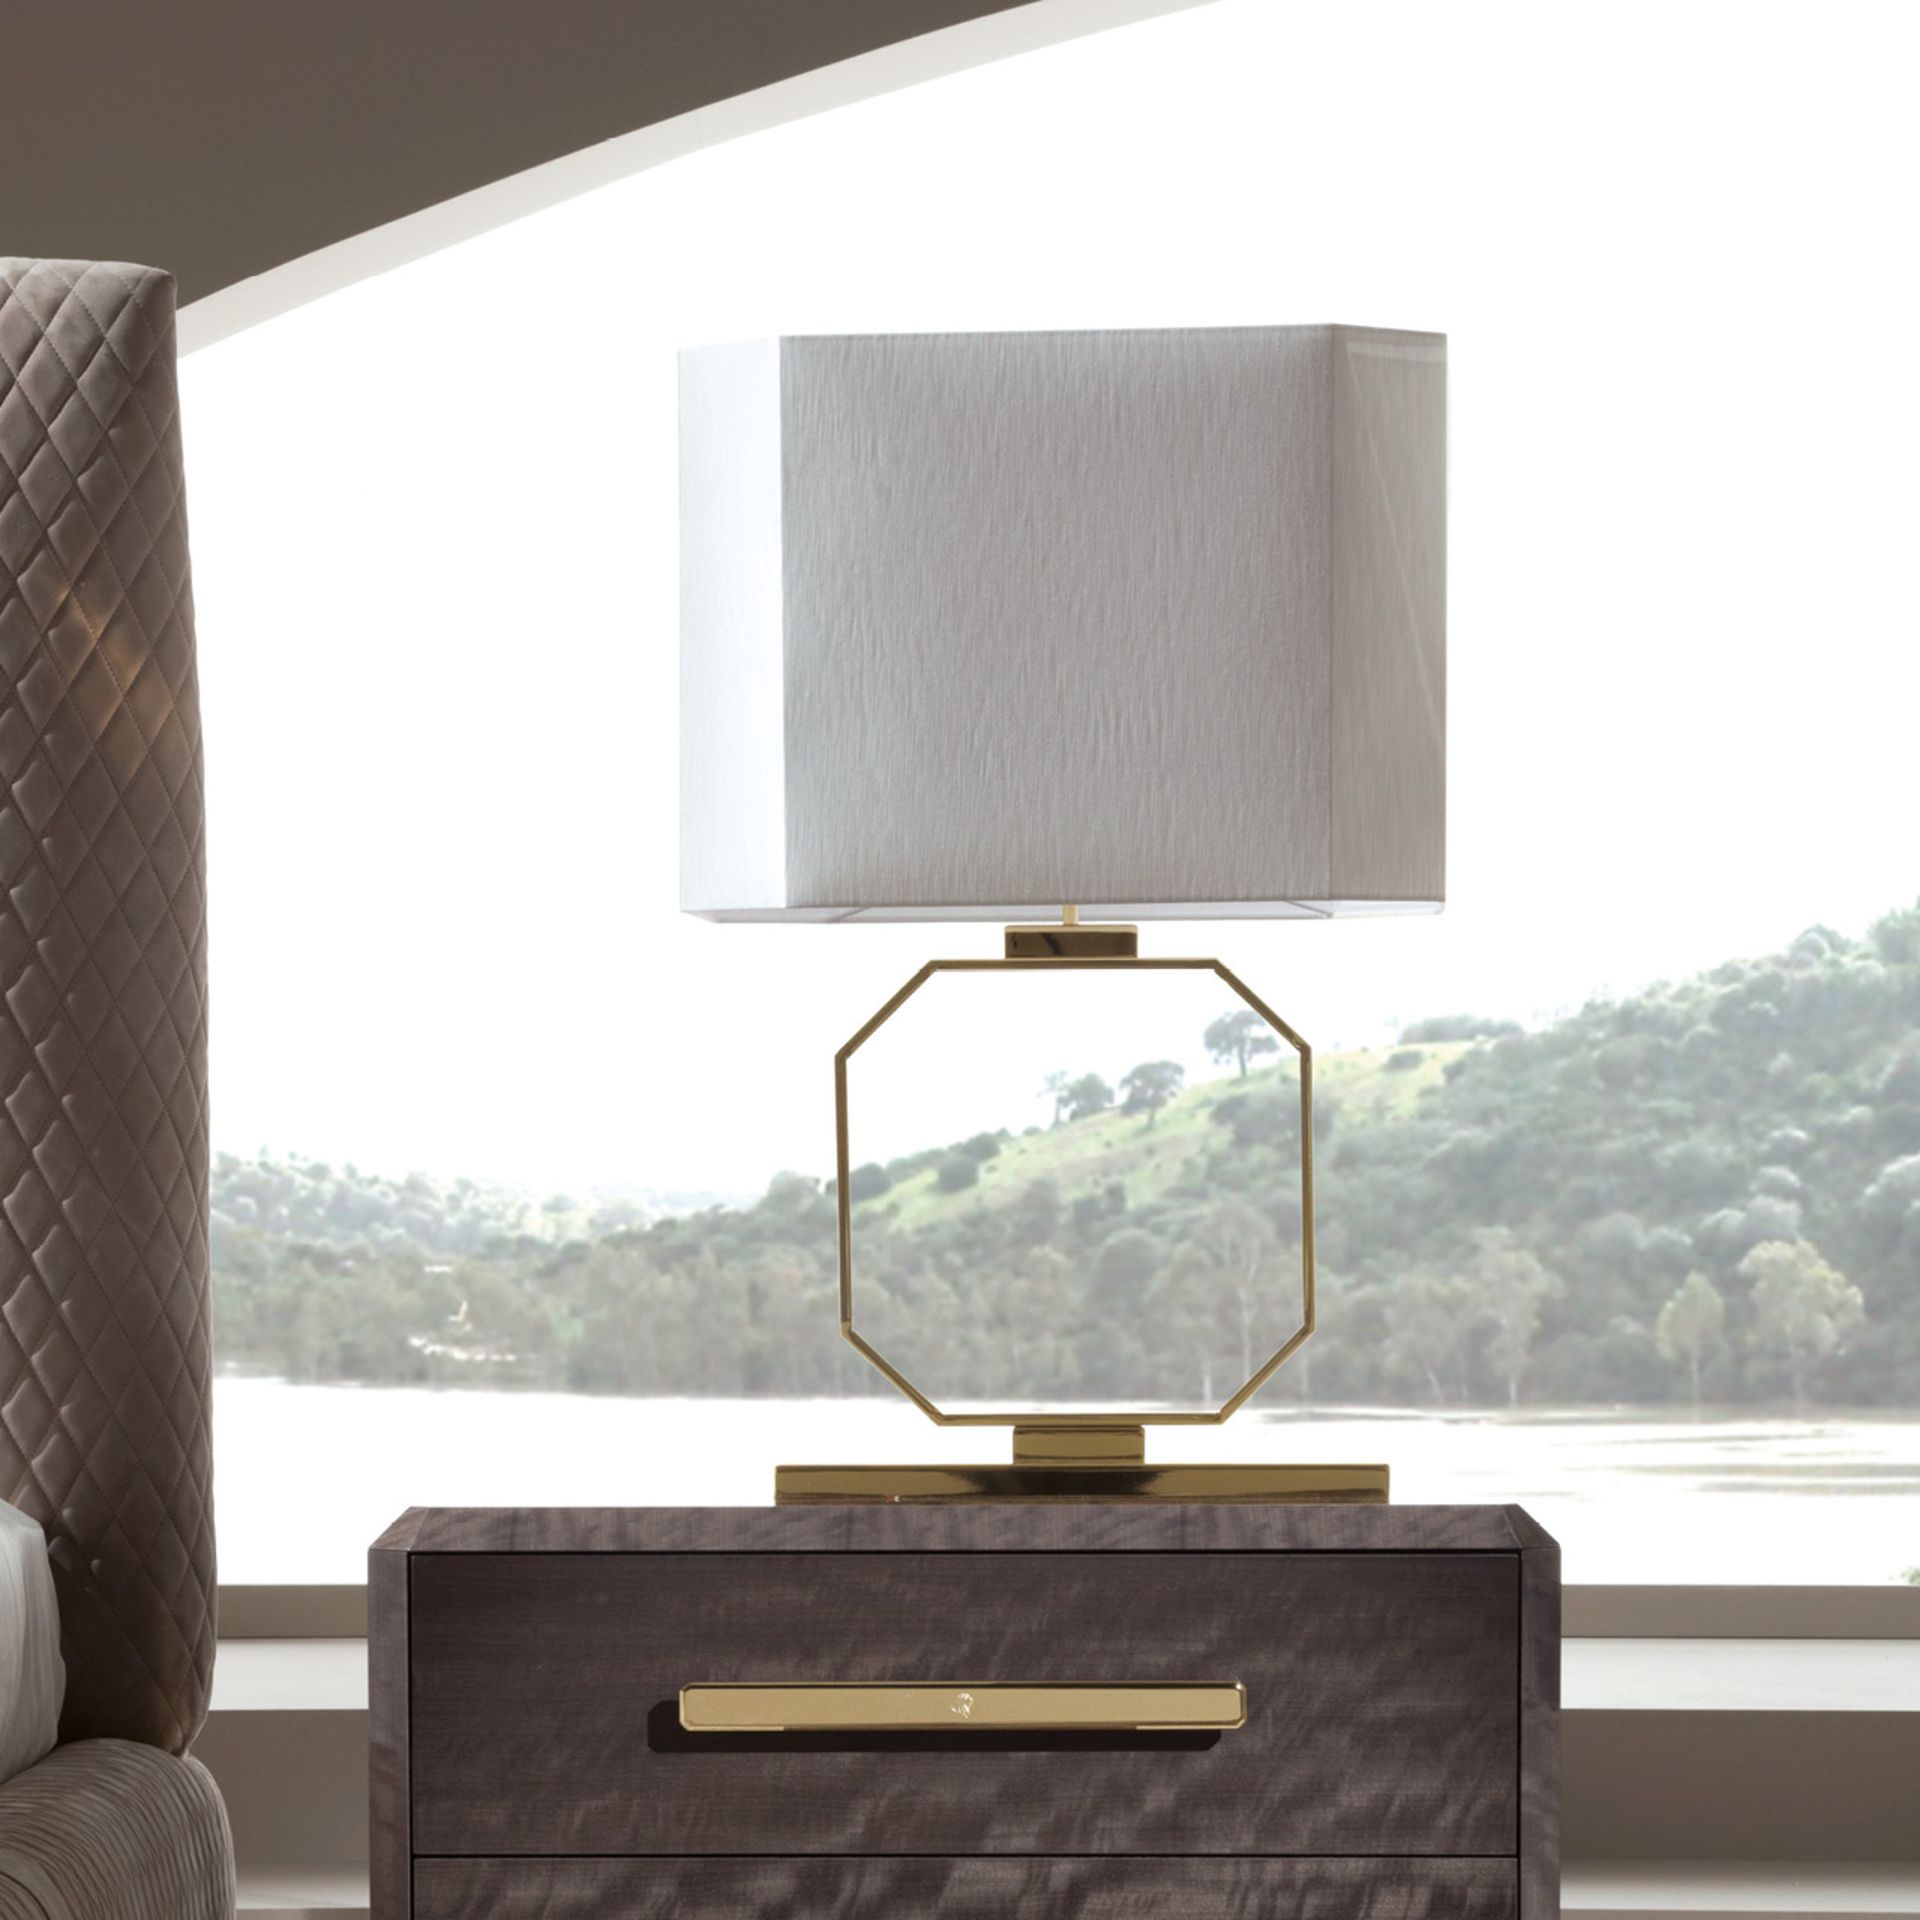 1 x GIORGIO COLLECTION 'Infinity' Luxury Table Lamp with Silk Shade - Made In Italy - RRP £4,000 - Image 2 of 7